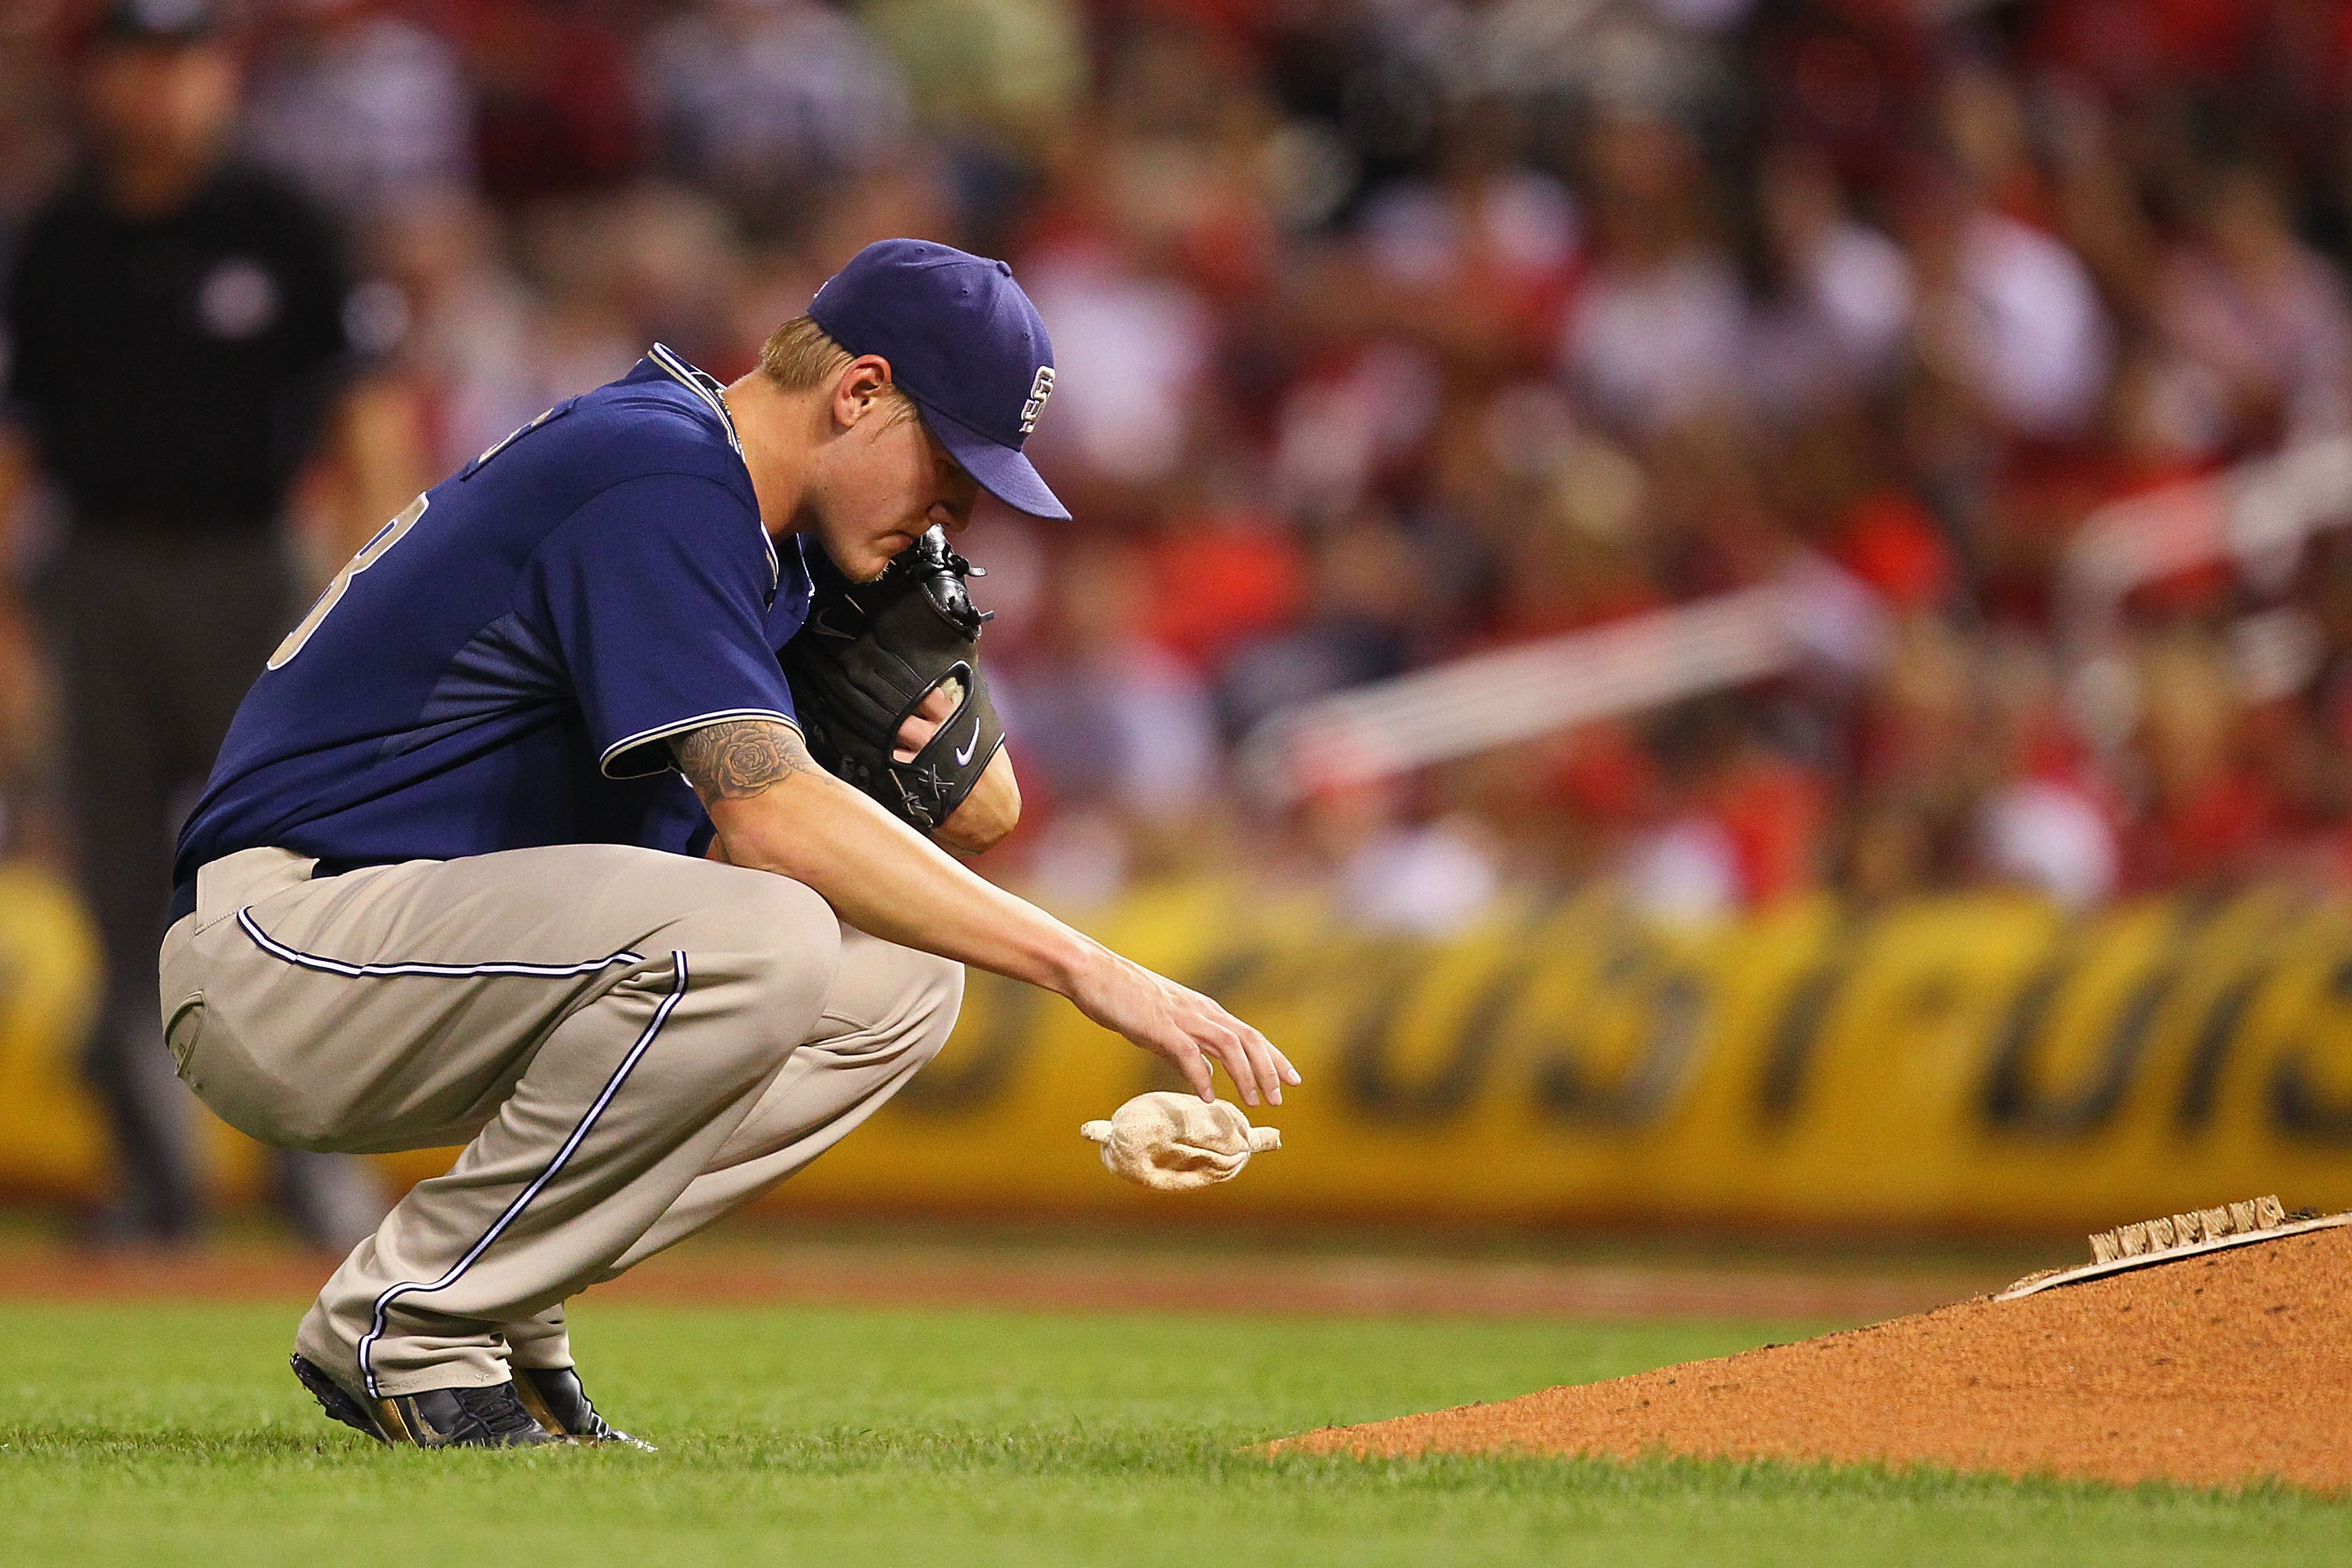 ST. LOUIS - SEPTEMBER 17: Starter Matt Latos #38 of the San Diego Padres regroups after giving up consecutive hits against the St. Louis Cardinals at Busch Stadium on September 17, 2010 in St. Louis, Missouri.  (Photo by Dilip Vishwanat/Getty Images)